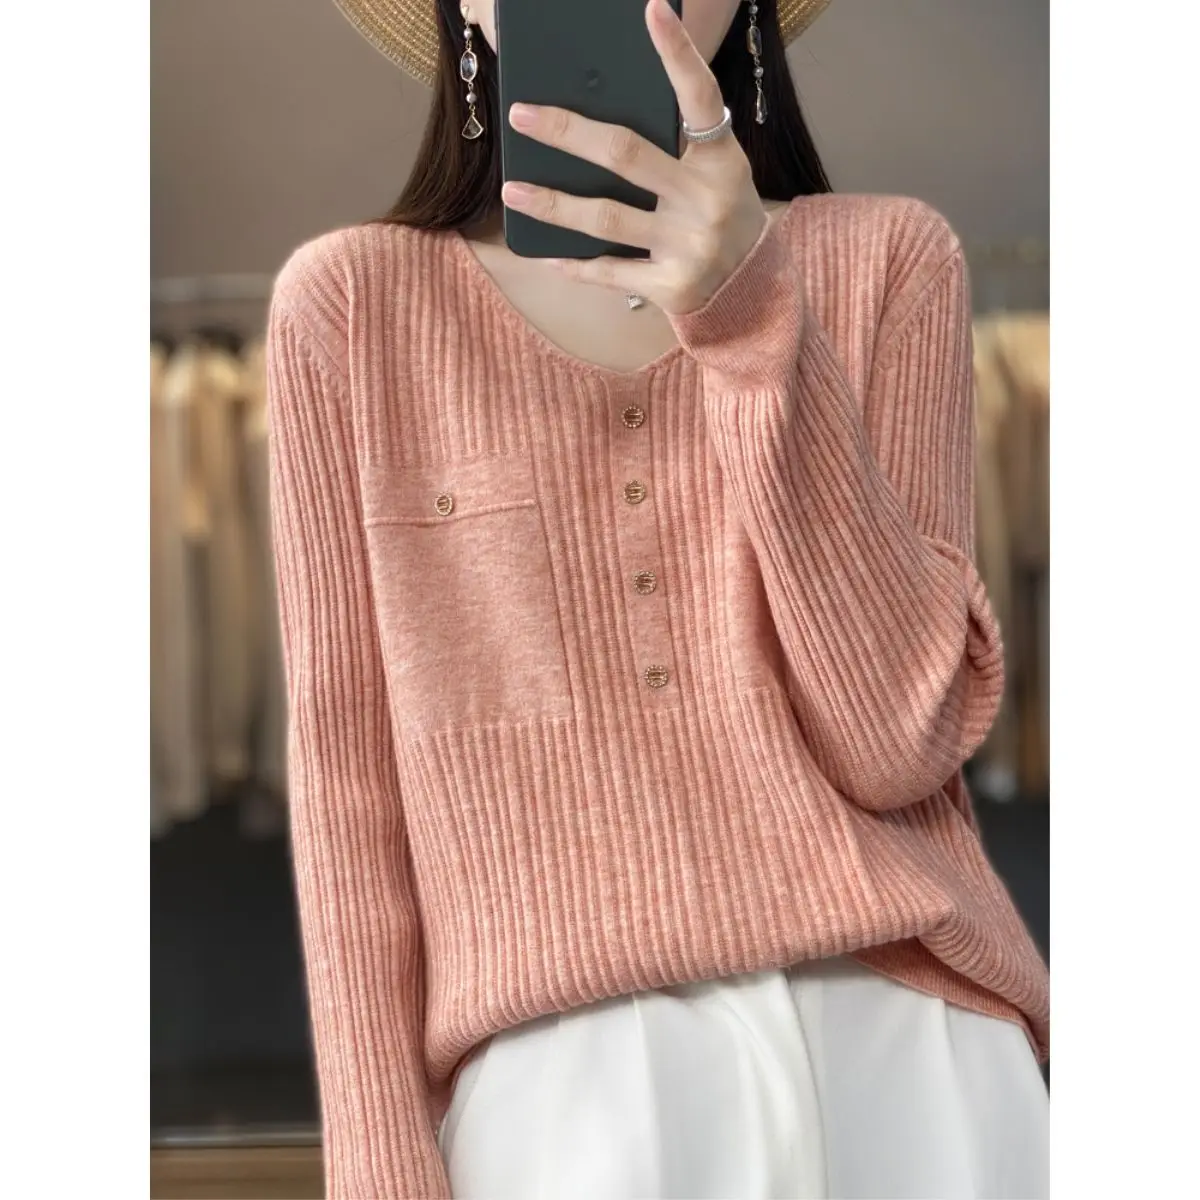 xreiWomen Sweater and Pullovers Fall Winter New Skinny Jumpers V neck Basic Warm Sweater Pullovers Warm